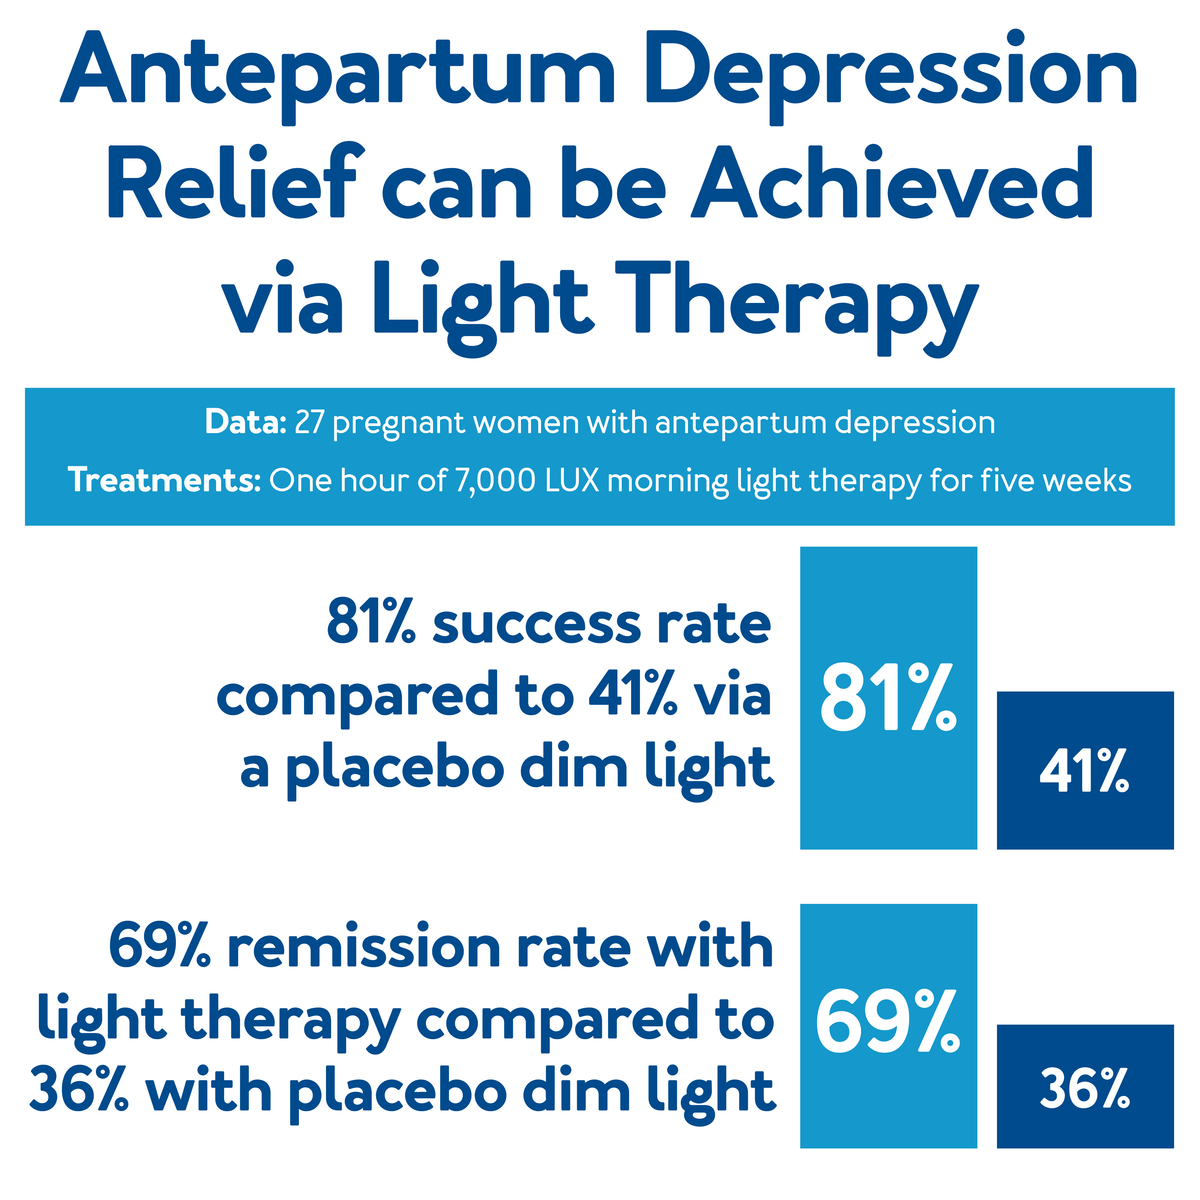 Antepartum Depression Relief can be Achieved via Light Therapy, further details are provided below.